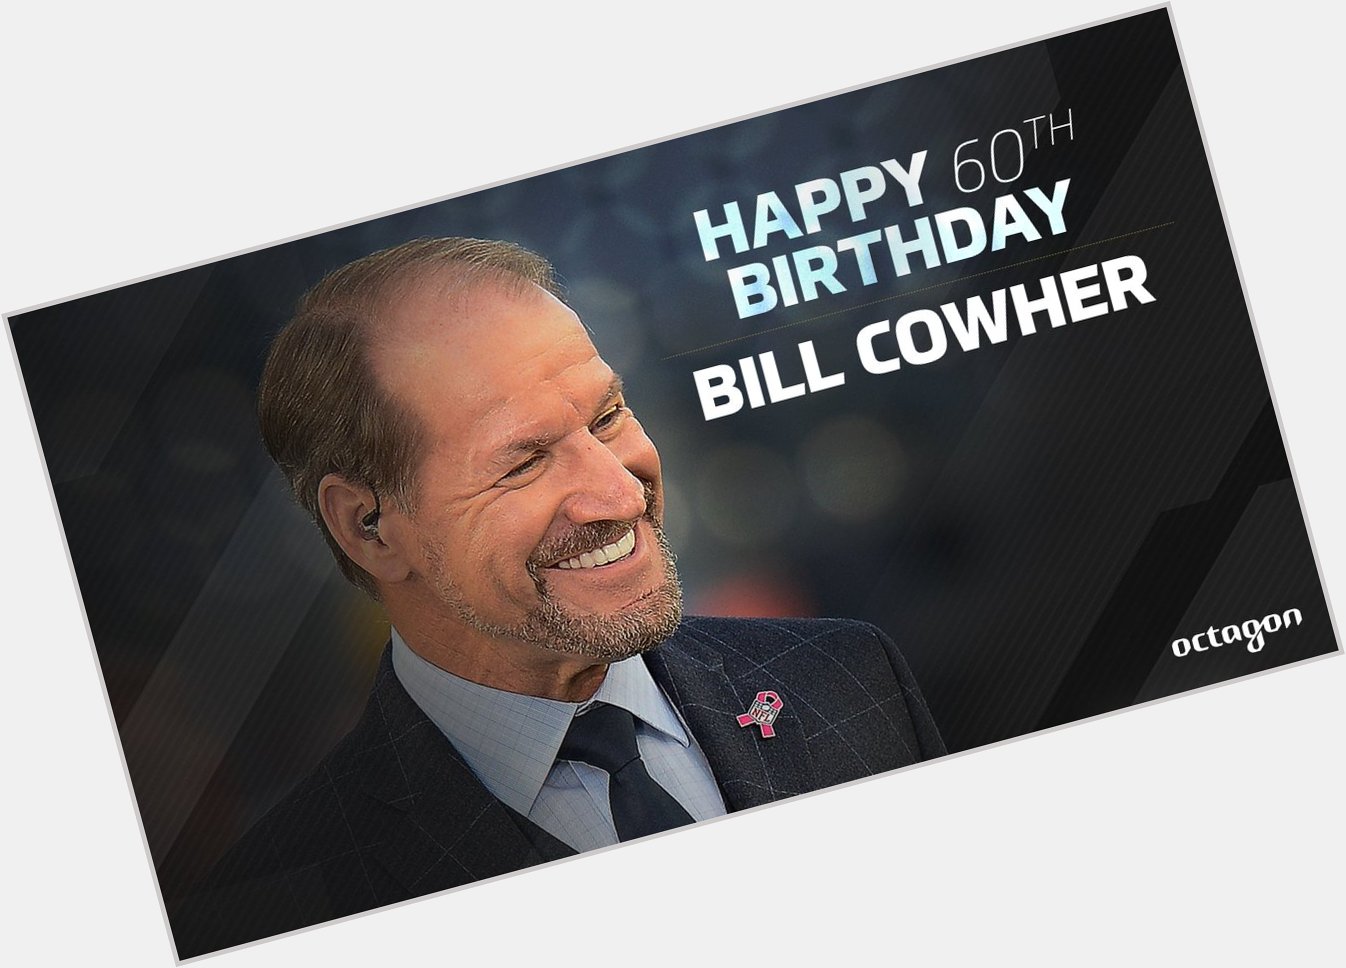 Wishing a Happy 60th Birthday to client Bill Cowher (   